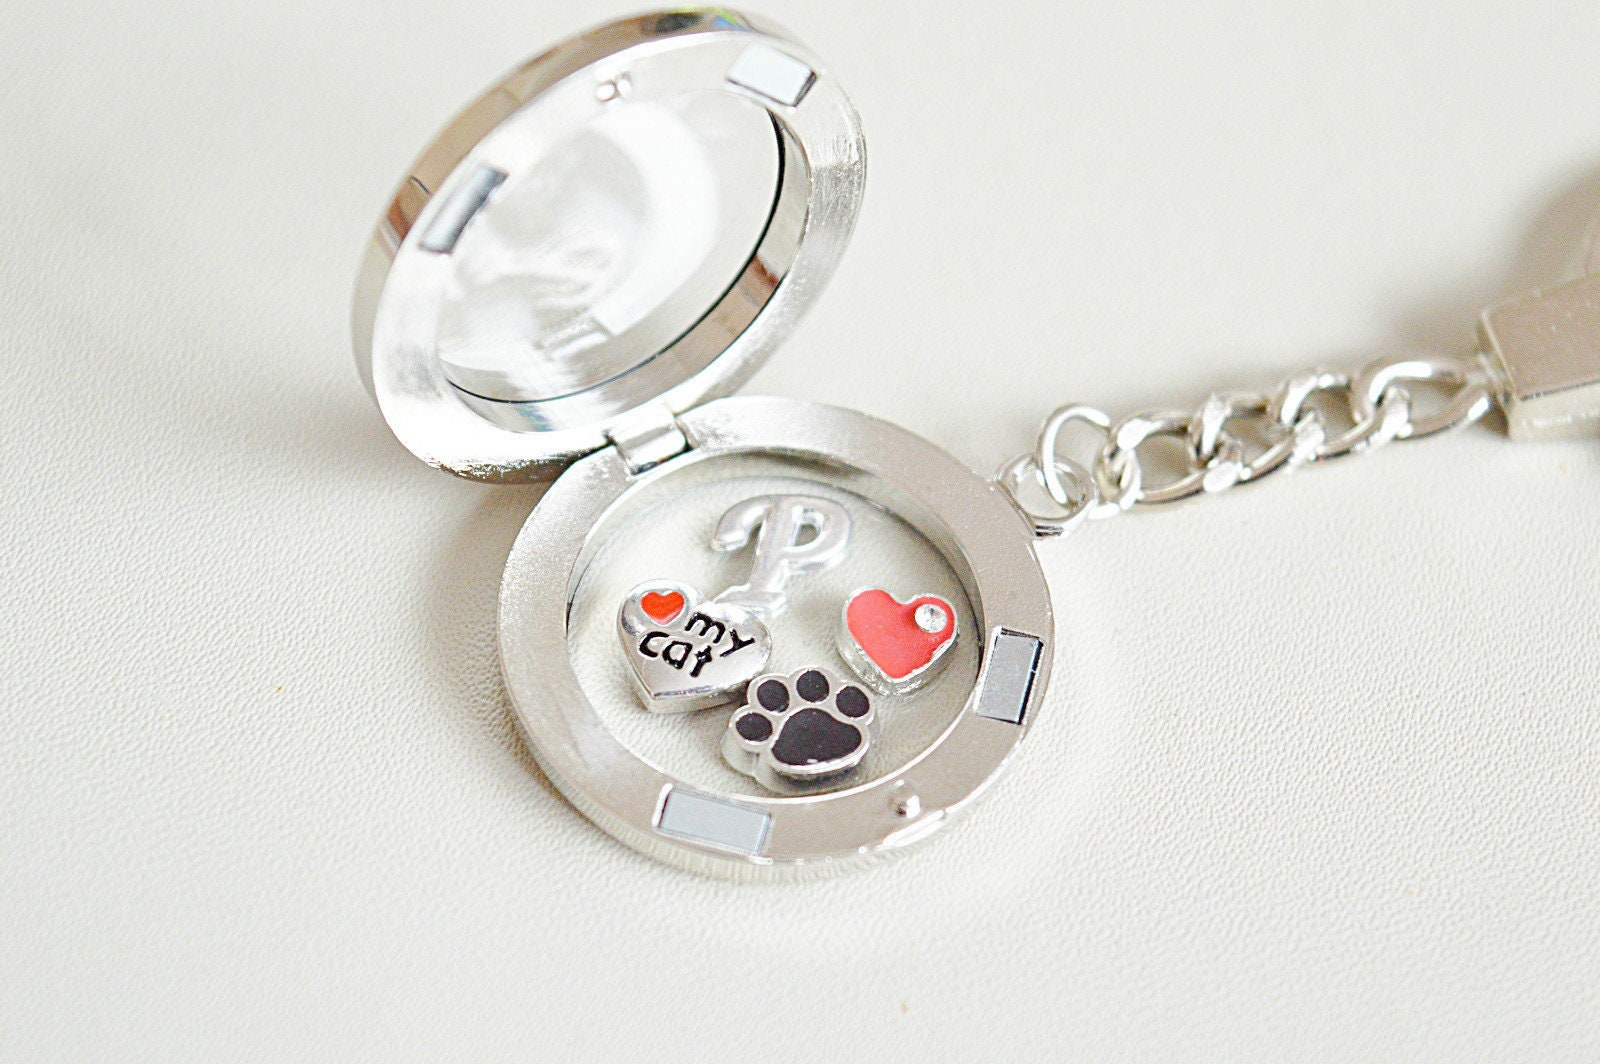 Cat Remembrance Gift, Cat Lover Gift, Cat Related Gifts, cat gifts for women, Cat Locket, cat Keyring, cat memorial, cat gifts for women